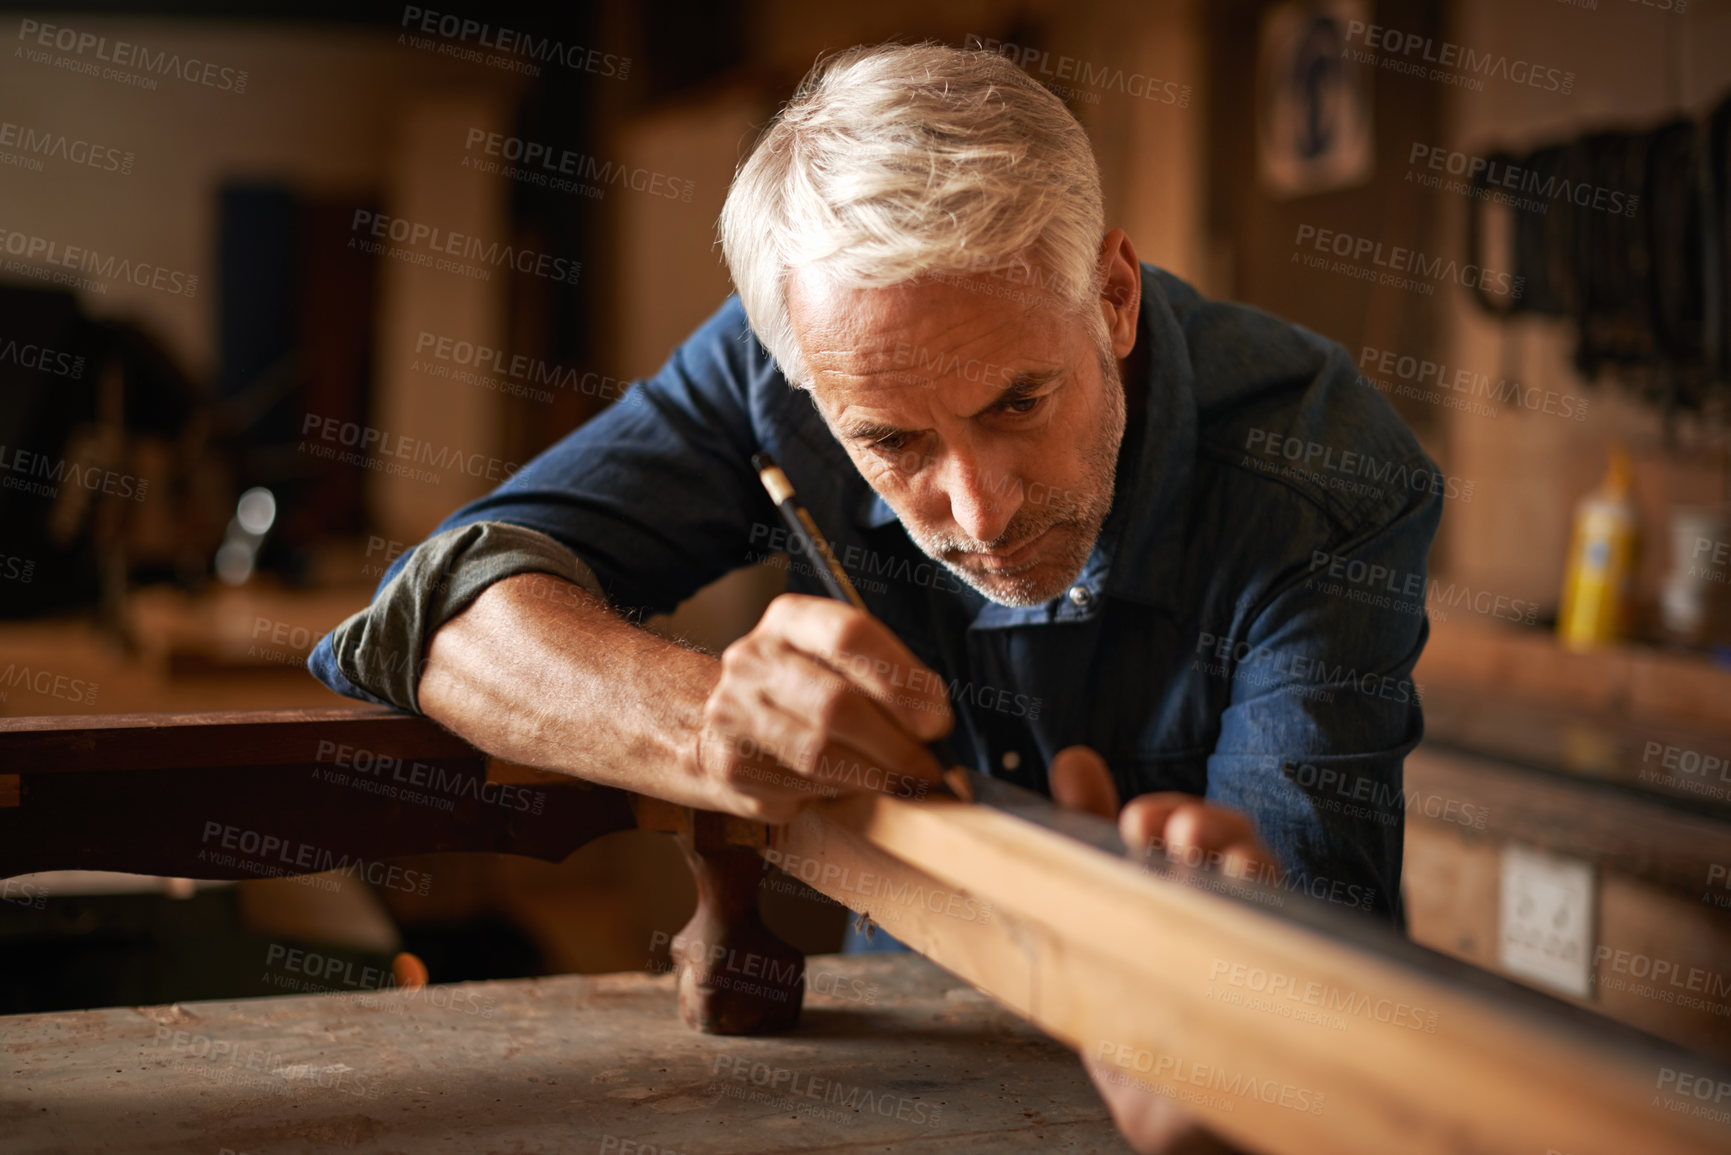 Buy stock photo Carpentry, furniture restoration and man with pencil, table and antique wood manufacturing workshop. Creativity, small business and focus, professional carpenter working on retro wood project design.